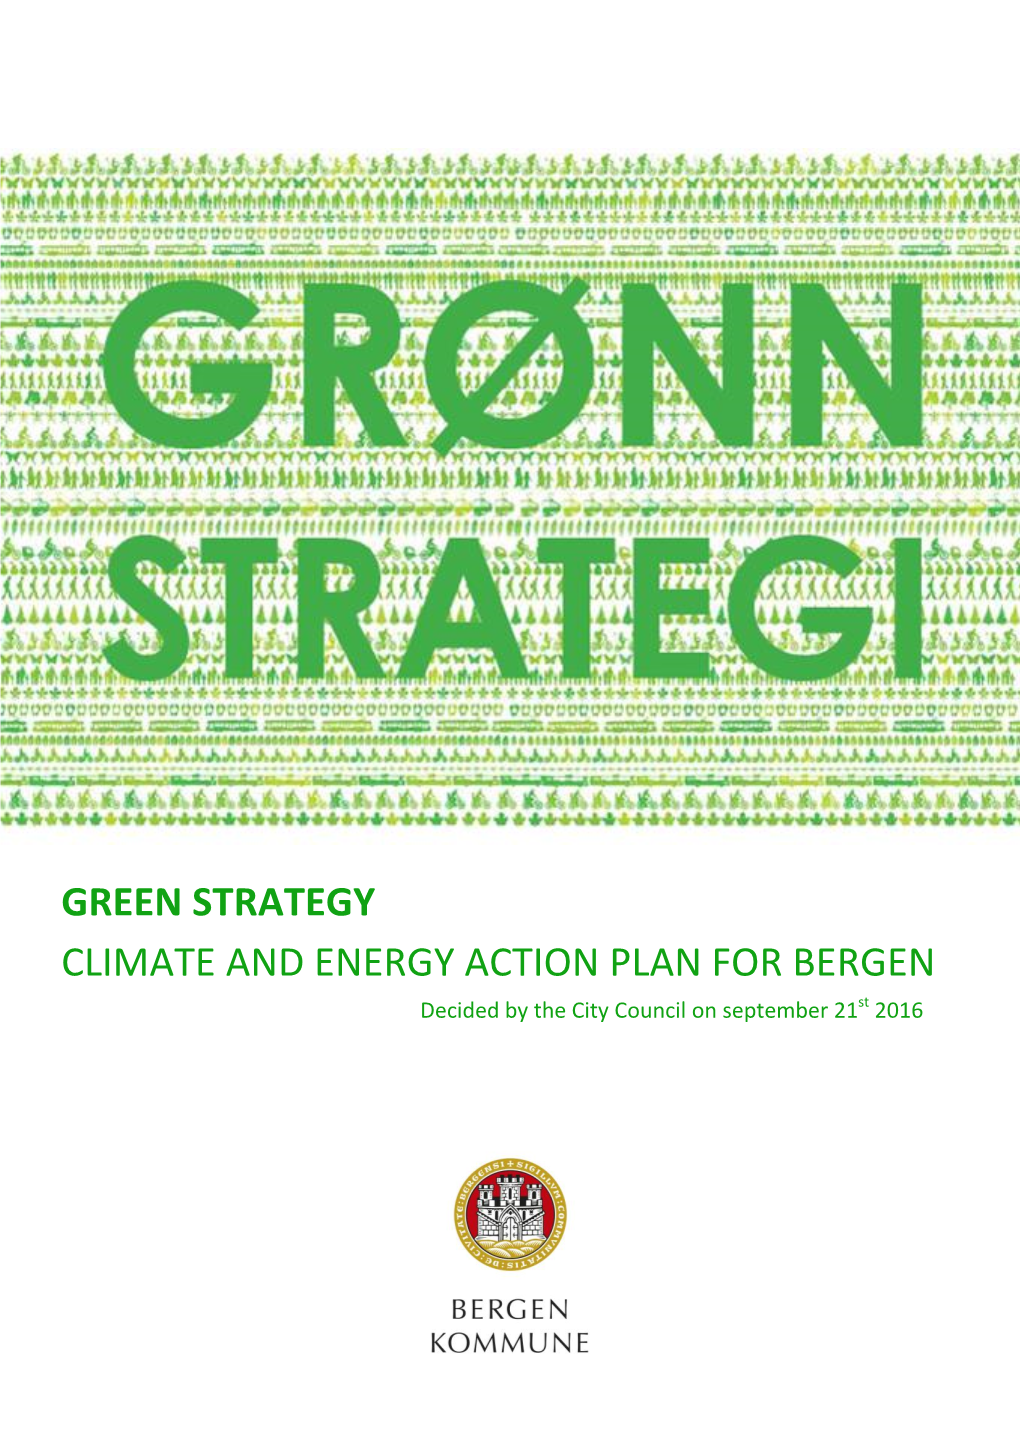 GREEN STRATEGY CLIMATE and ENERGY ACTION PLAN for BERGEN St Decided by the City Council on September 21 2016